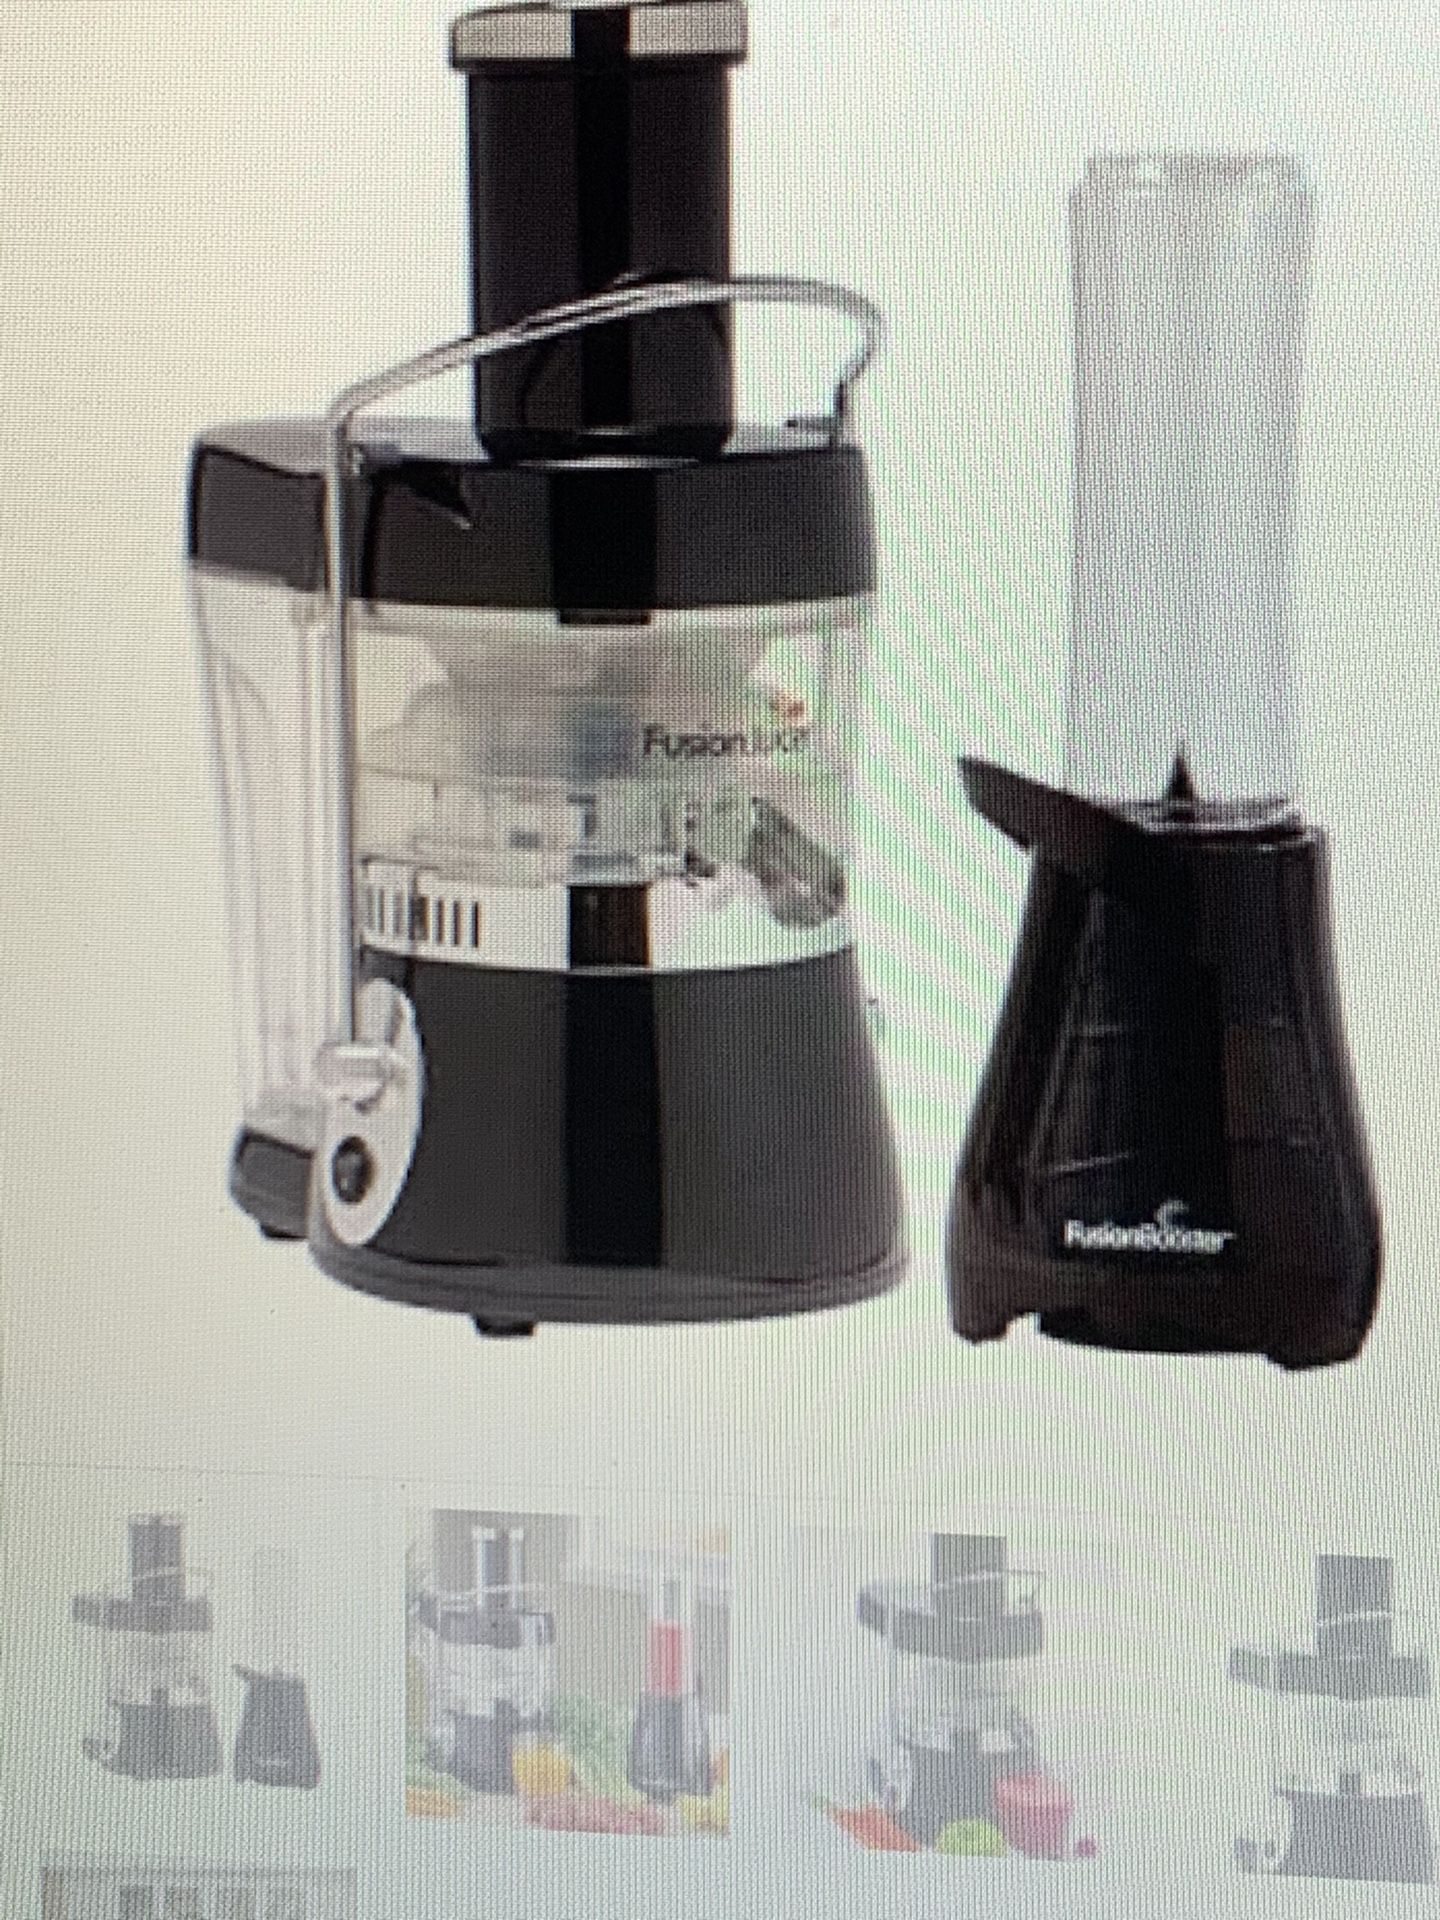 Fusion Juicer with booster blender